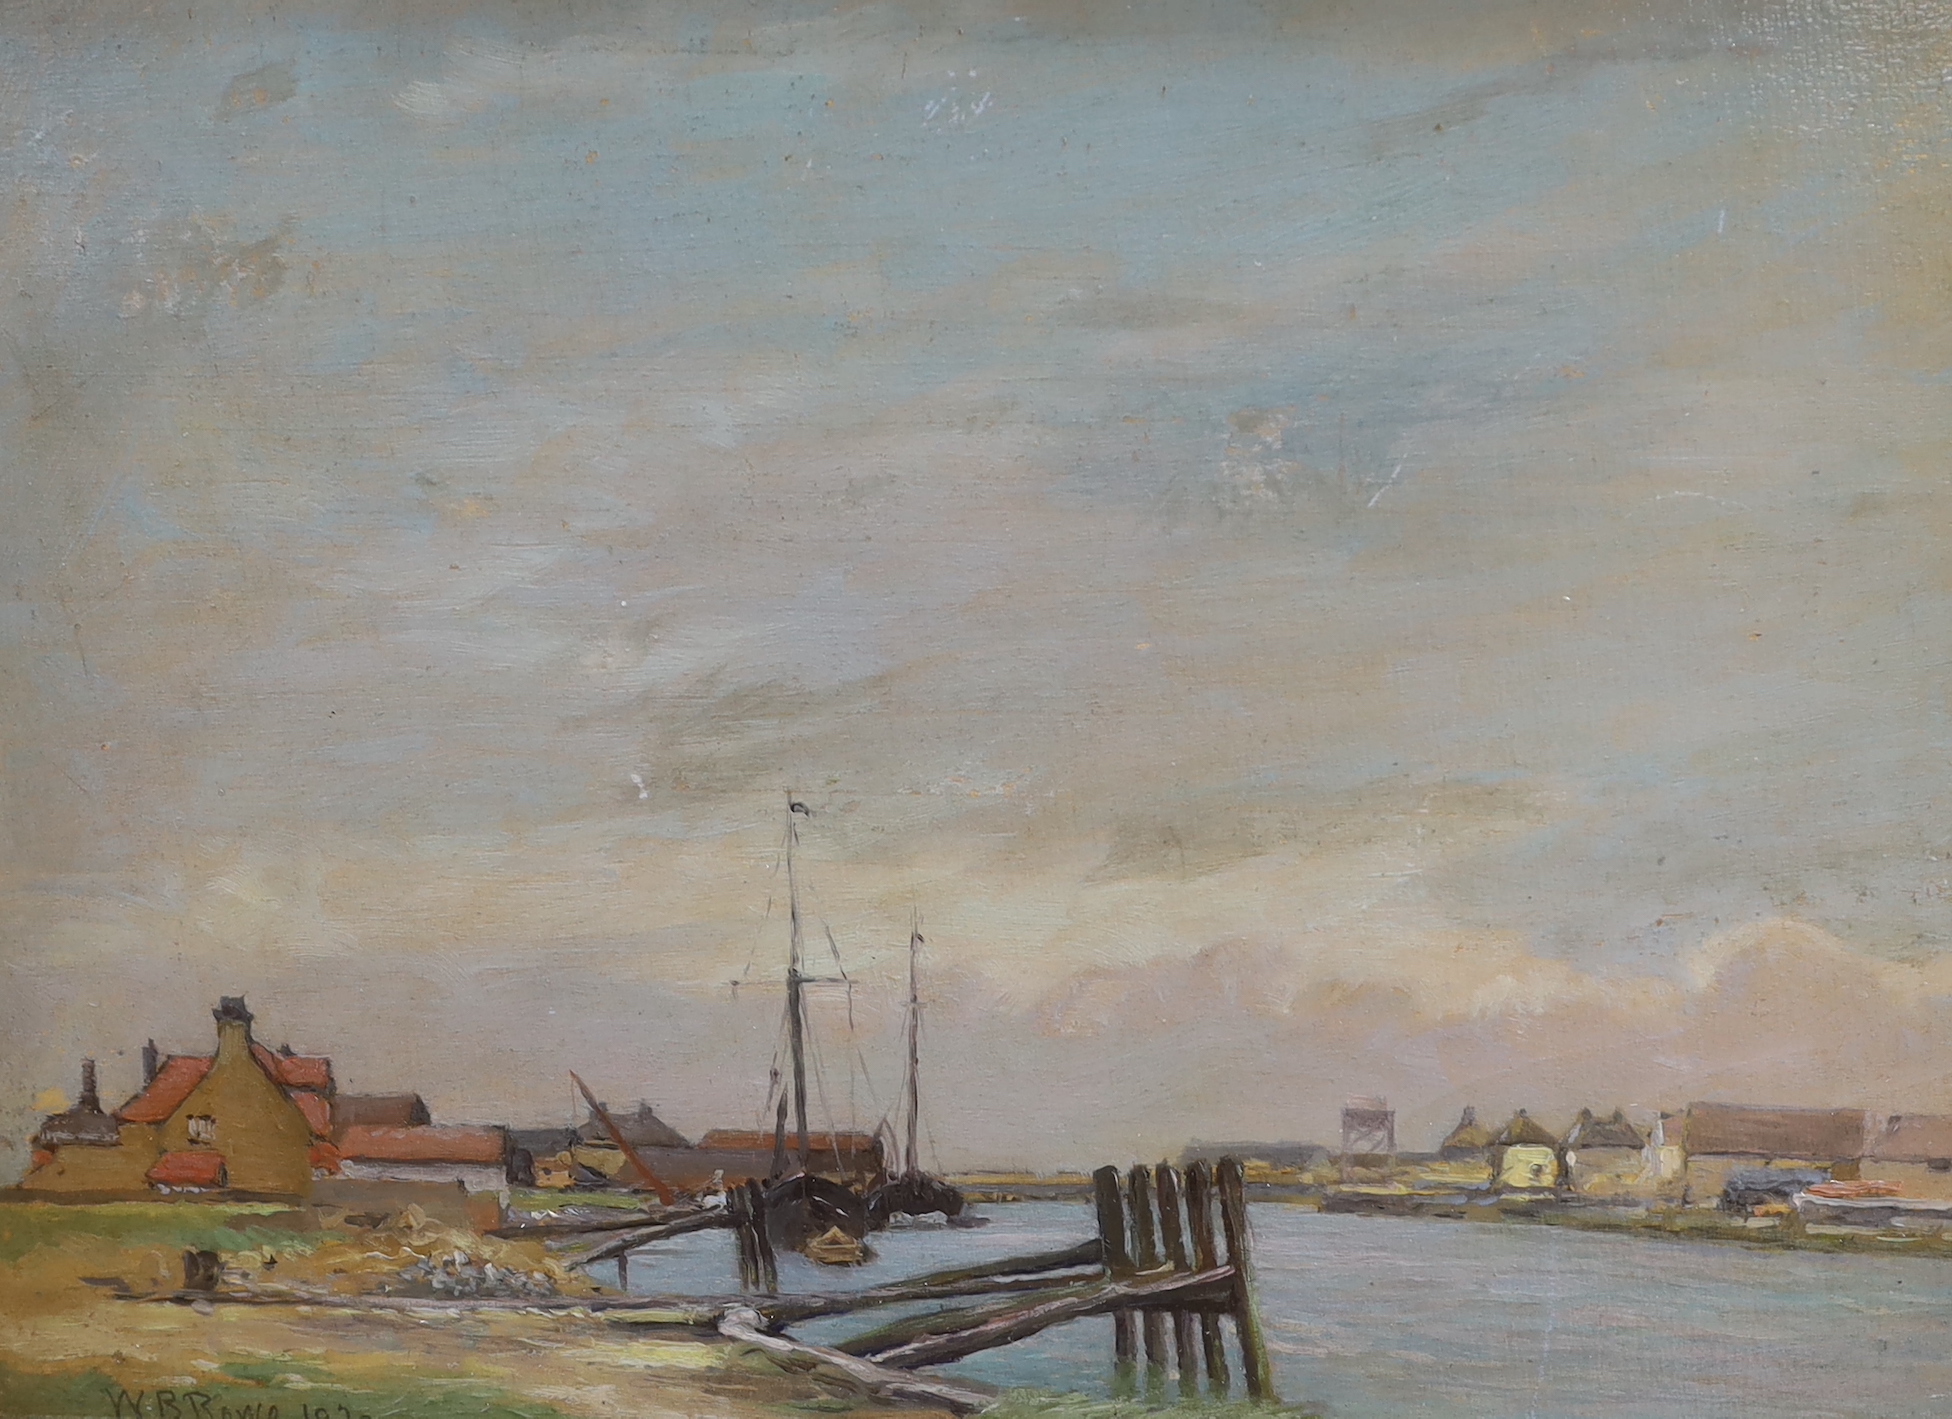 W B Rowe (1910-1955) pair of oils on board, Adur at Littlehampton, each signed, one dated 1920, 25 x 35cm